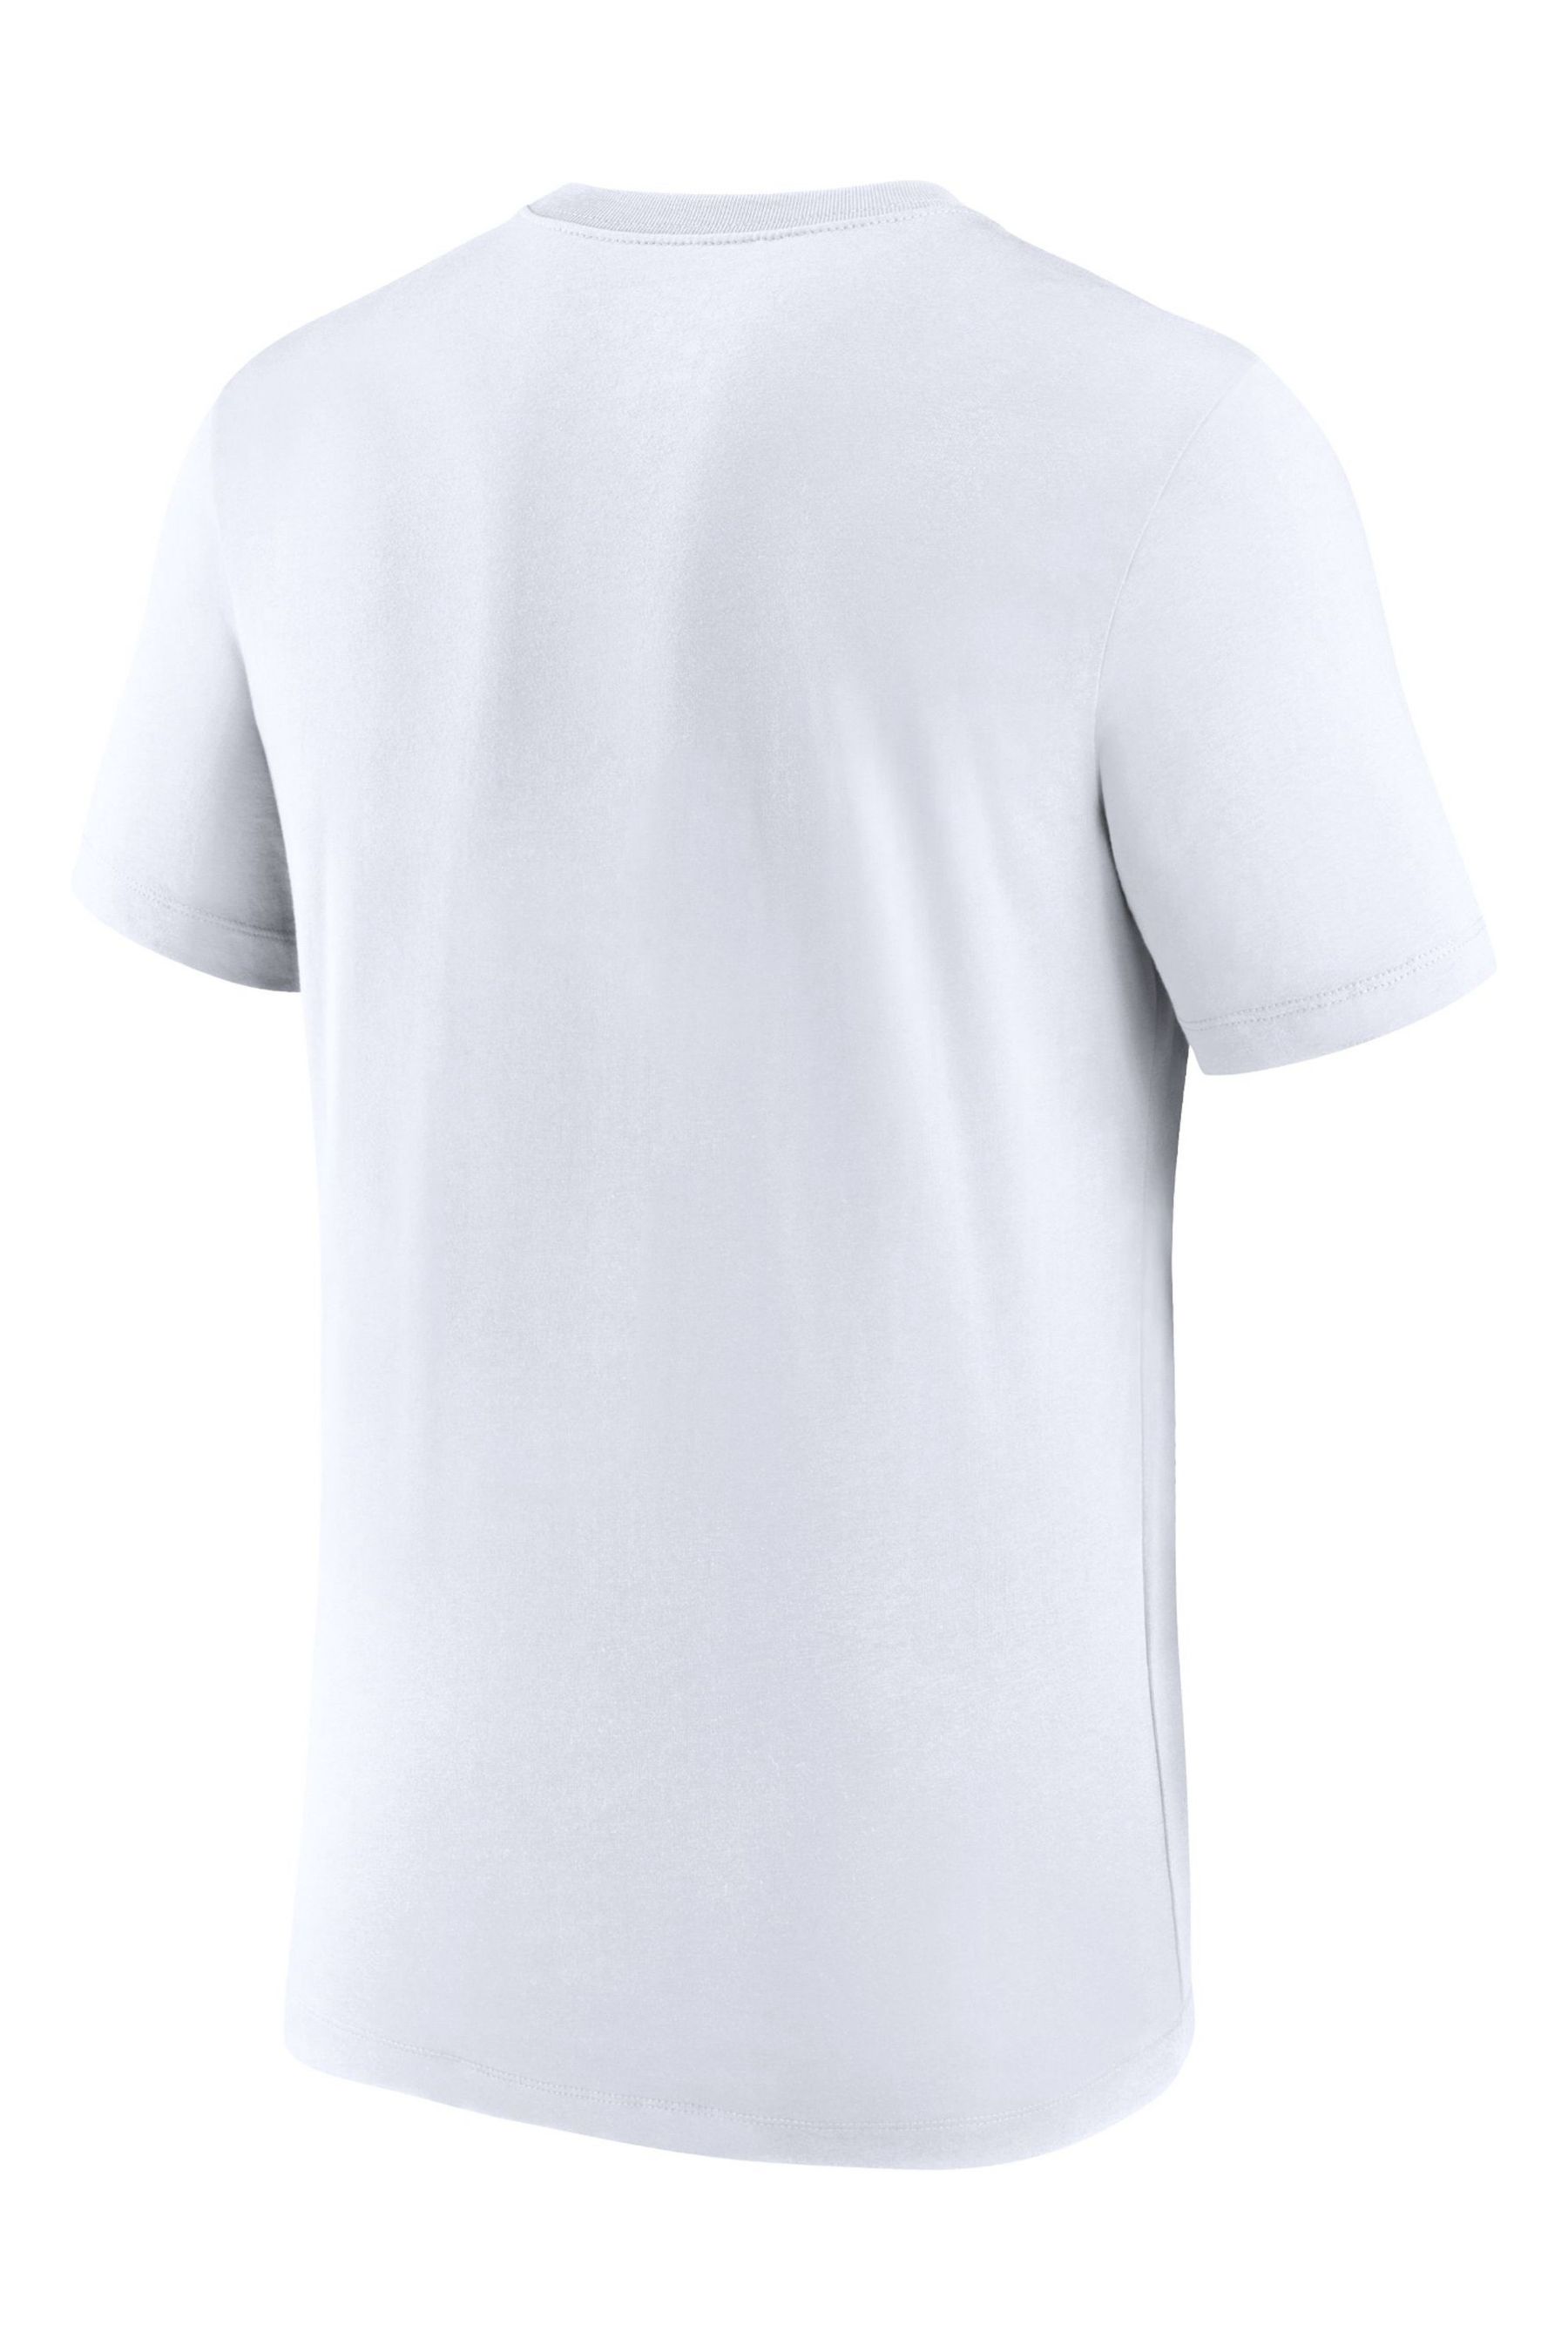 Buy Nike White Chelsea Photo T-Shirt from the Next UK online shop